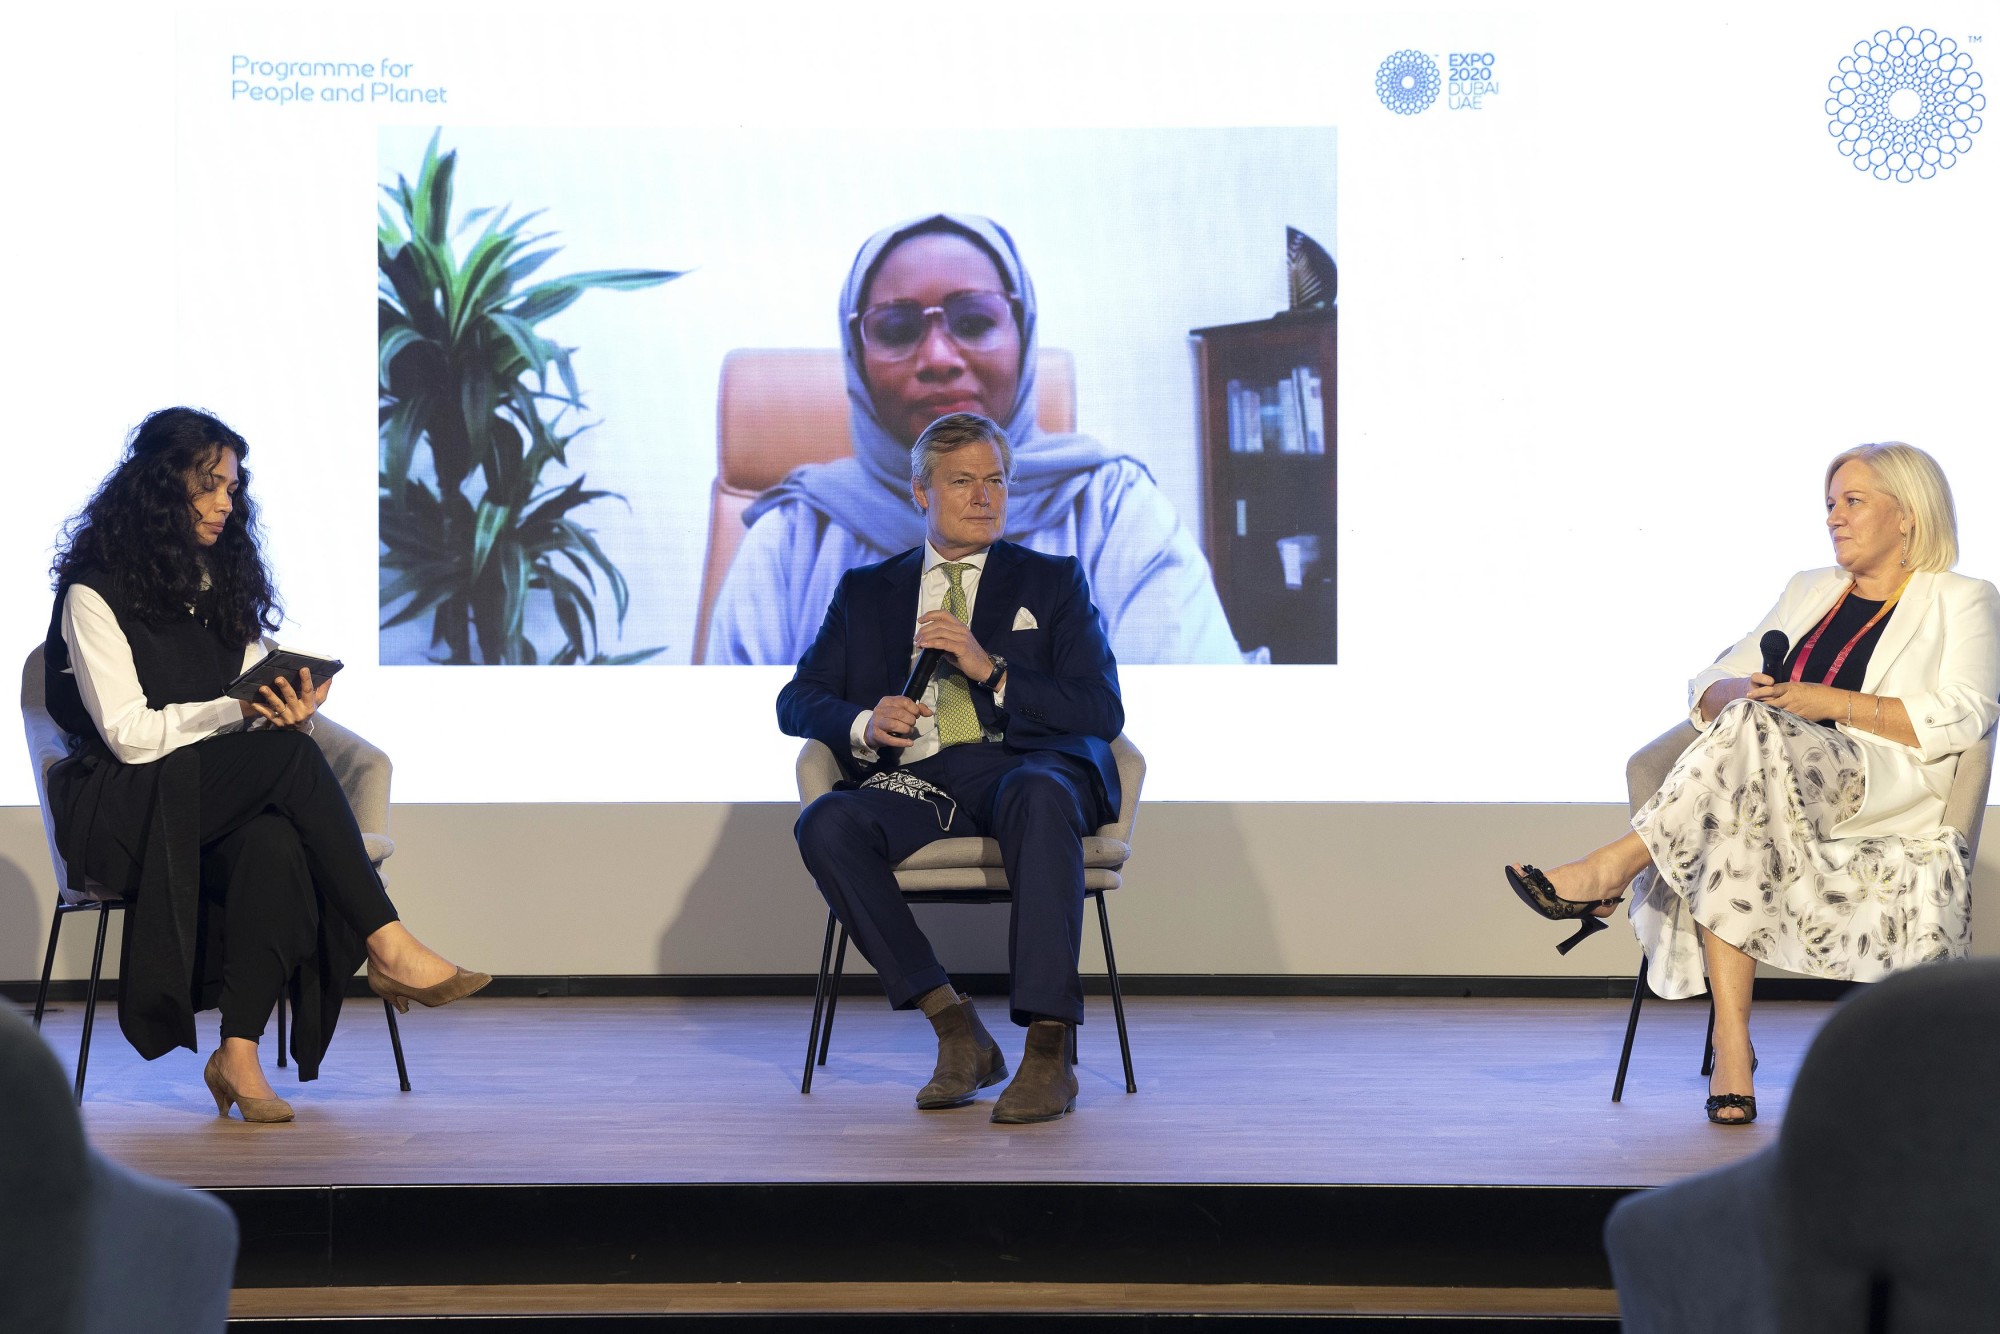 Dr Gunter Pauli (C), Entrepreneur, pedagogue and author, Lesley Kennedy (R), Director, OnlyFromNZ and Natalie Becker-Aakervik (L), Founder, Storyteller, Thought Leader Global and moderator during the Water-Food-Energy Summit at Nexus for Pe